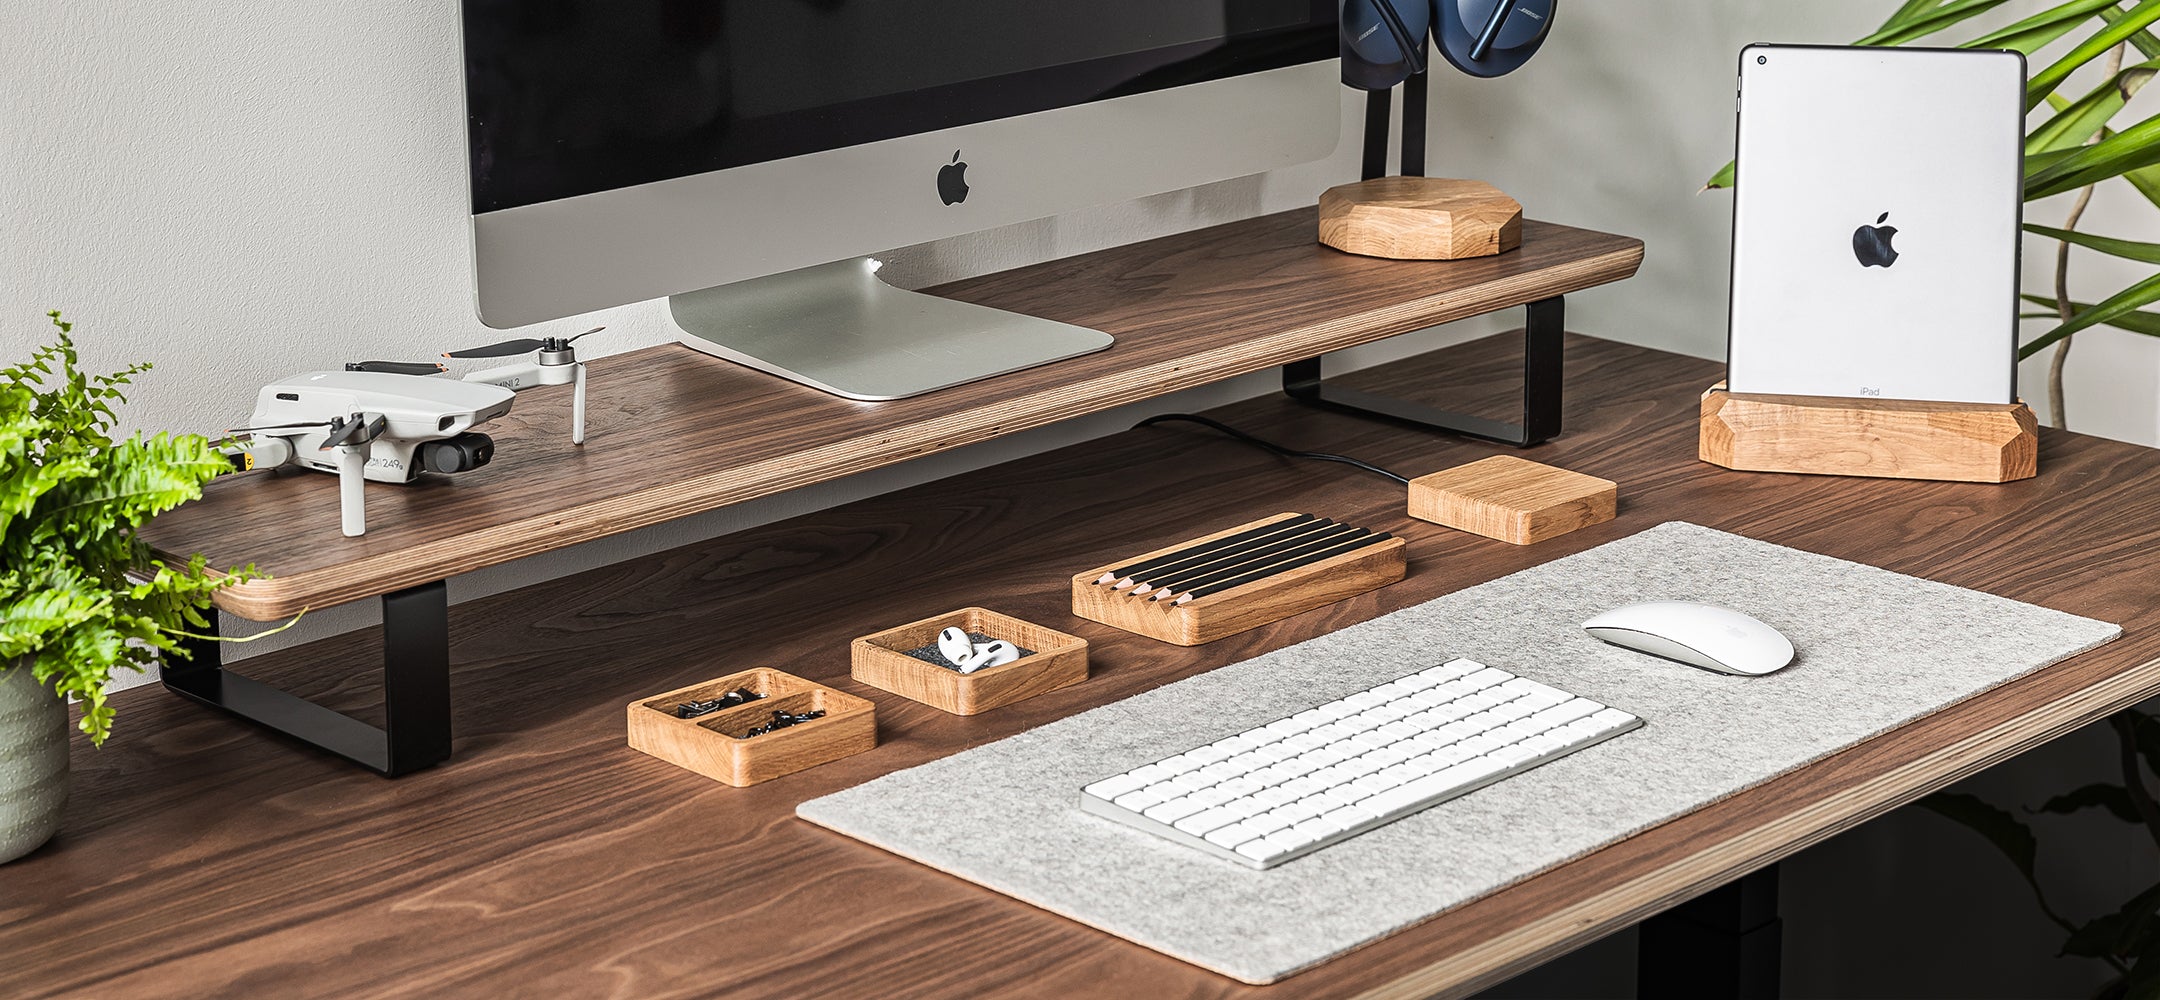 A collection of desk accessories made of solid American walnut and oak wood.